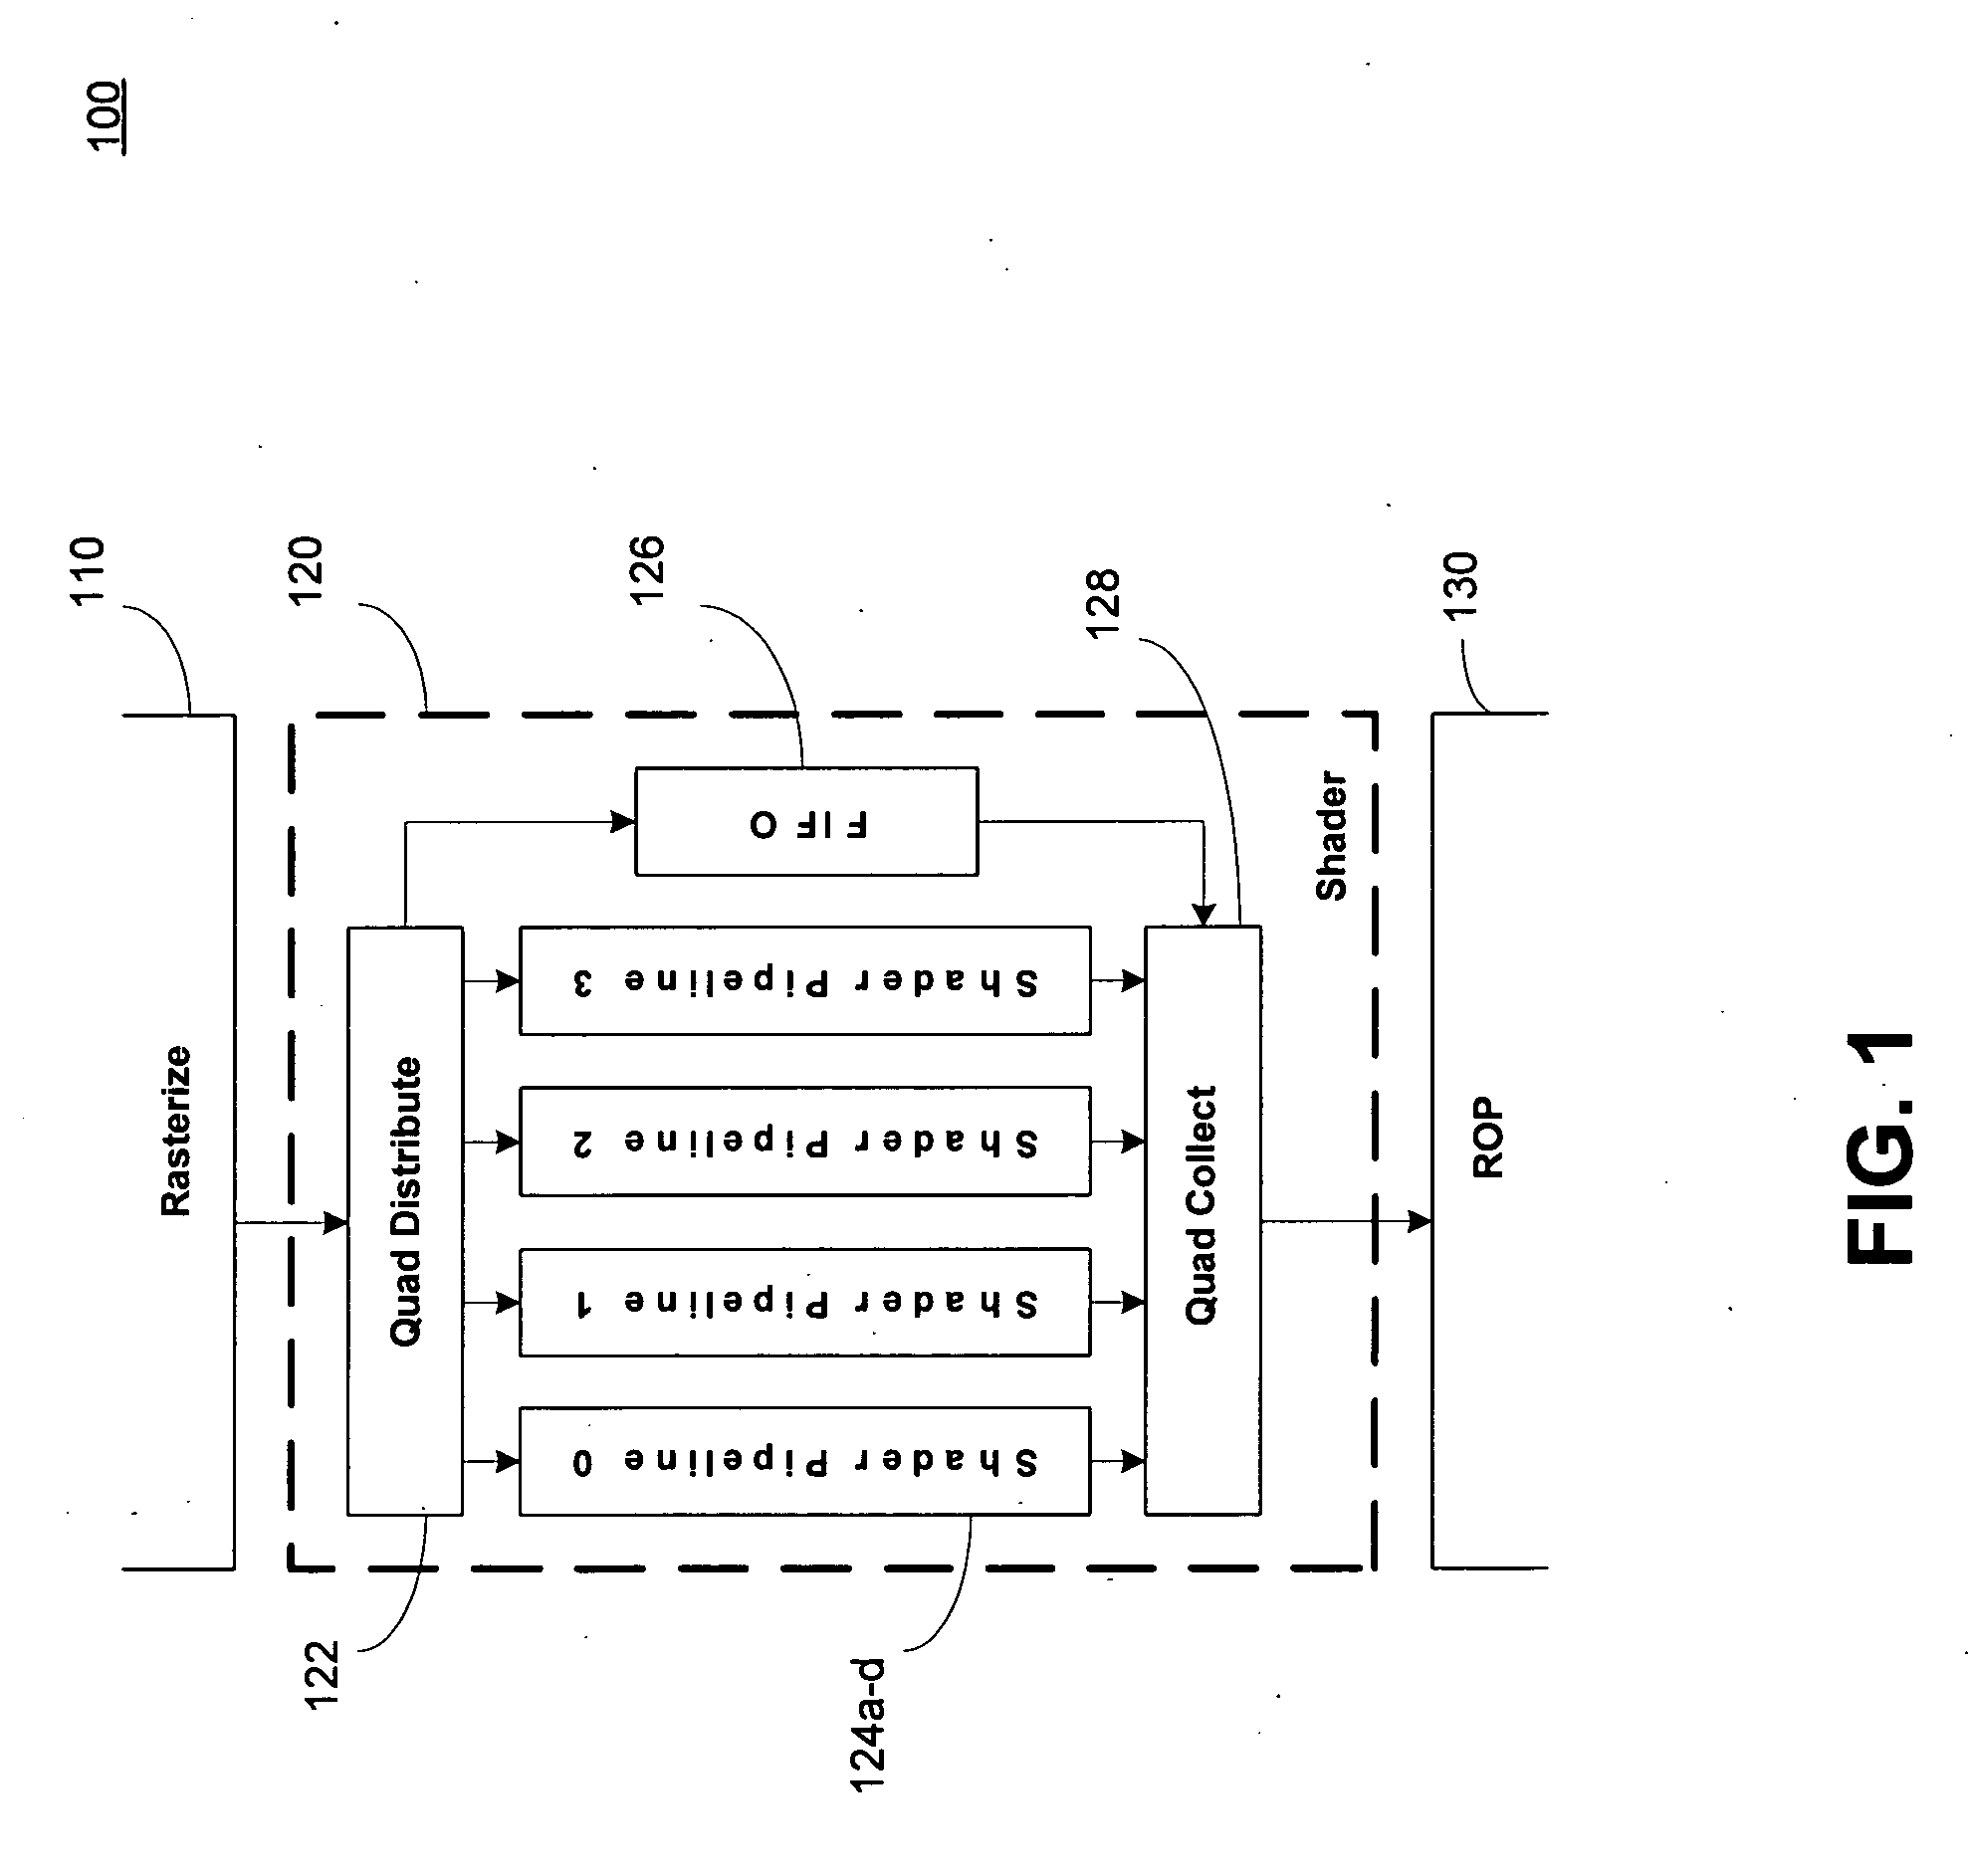 Method and apparatus for register allocation in presence of hardware constraints